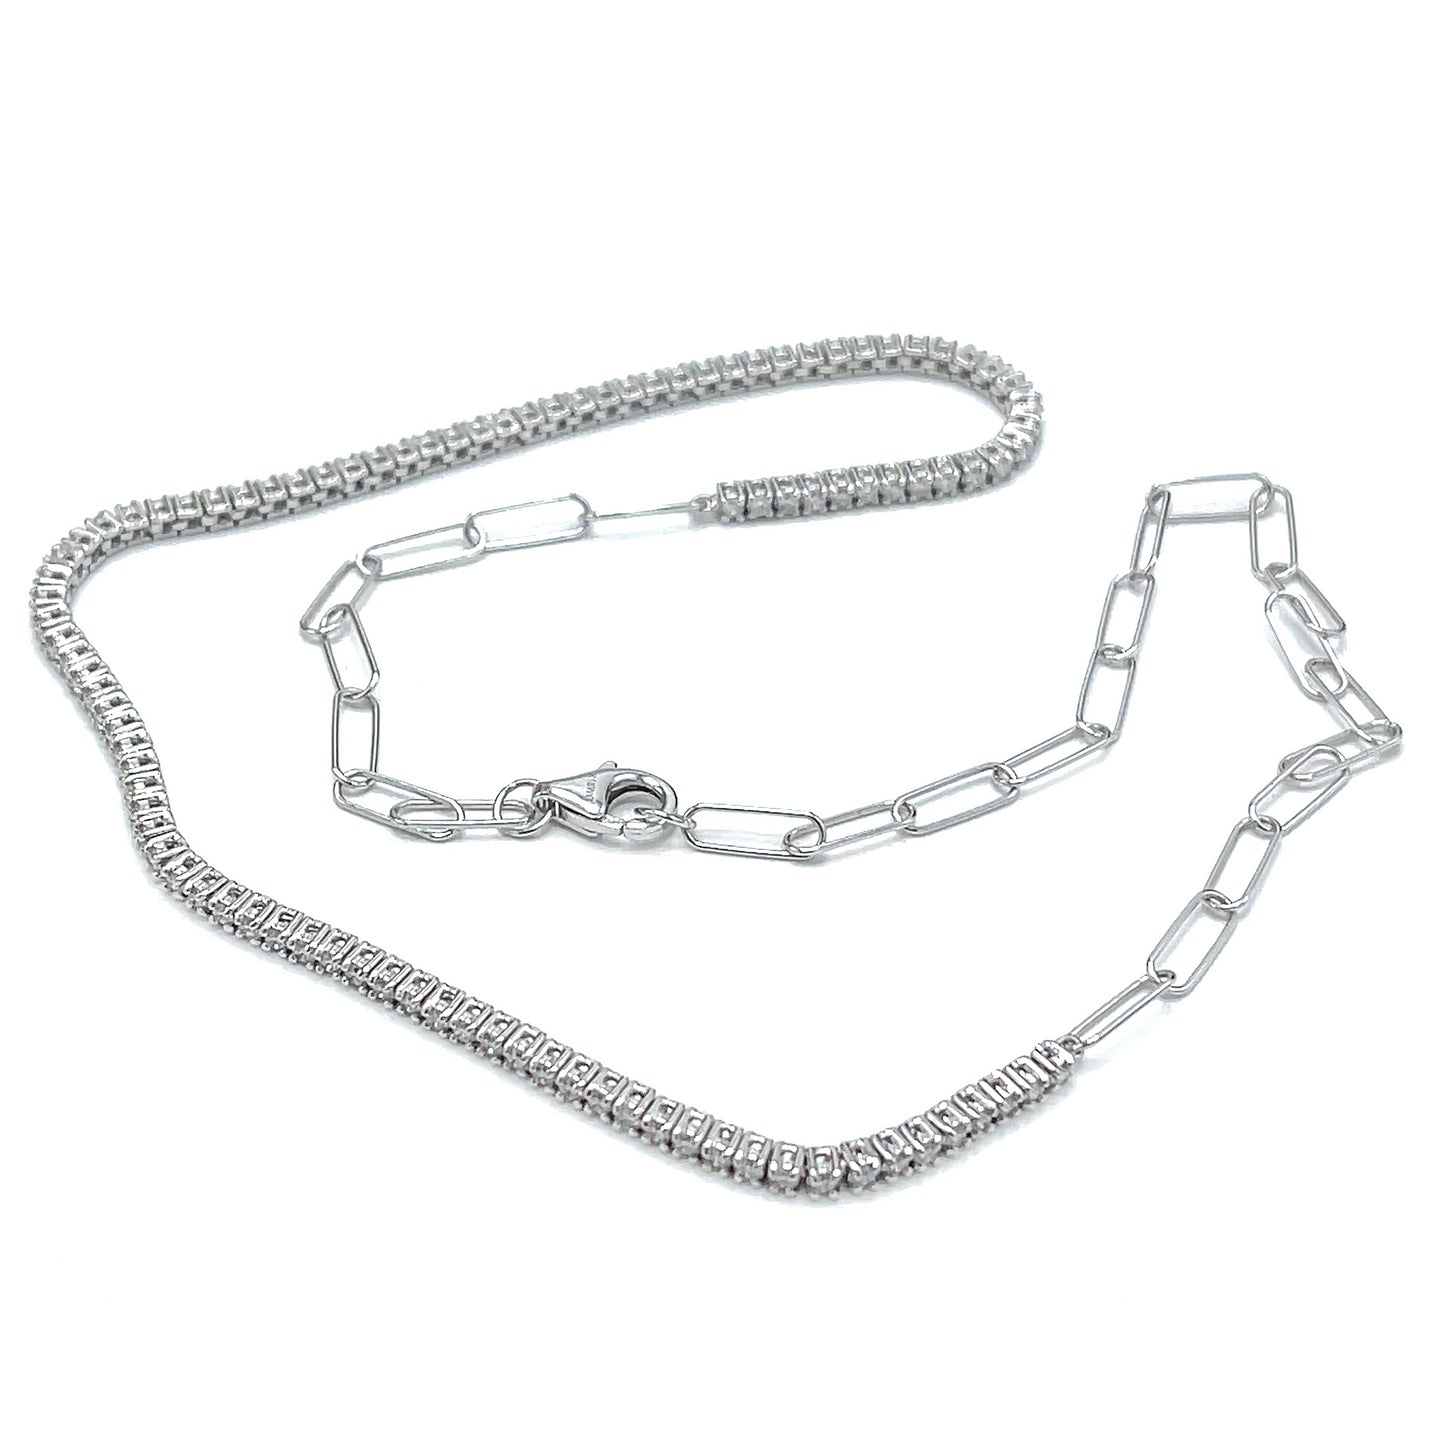 18 kt White Gold Chain Link Diamond Adjustable Choker Necklace